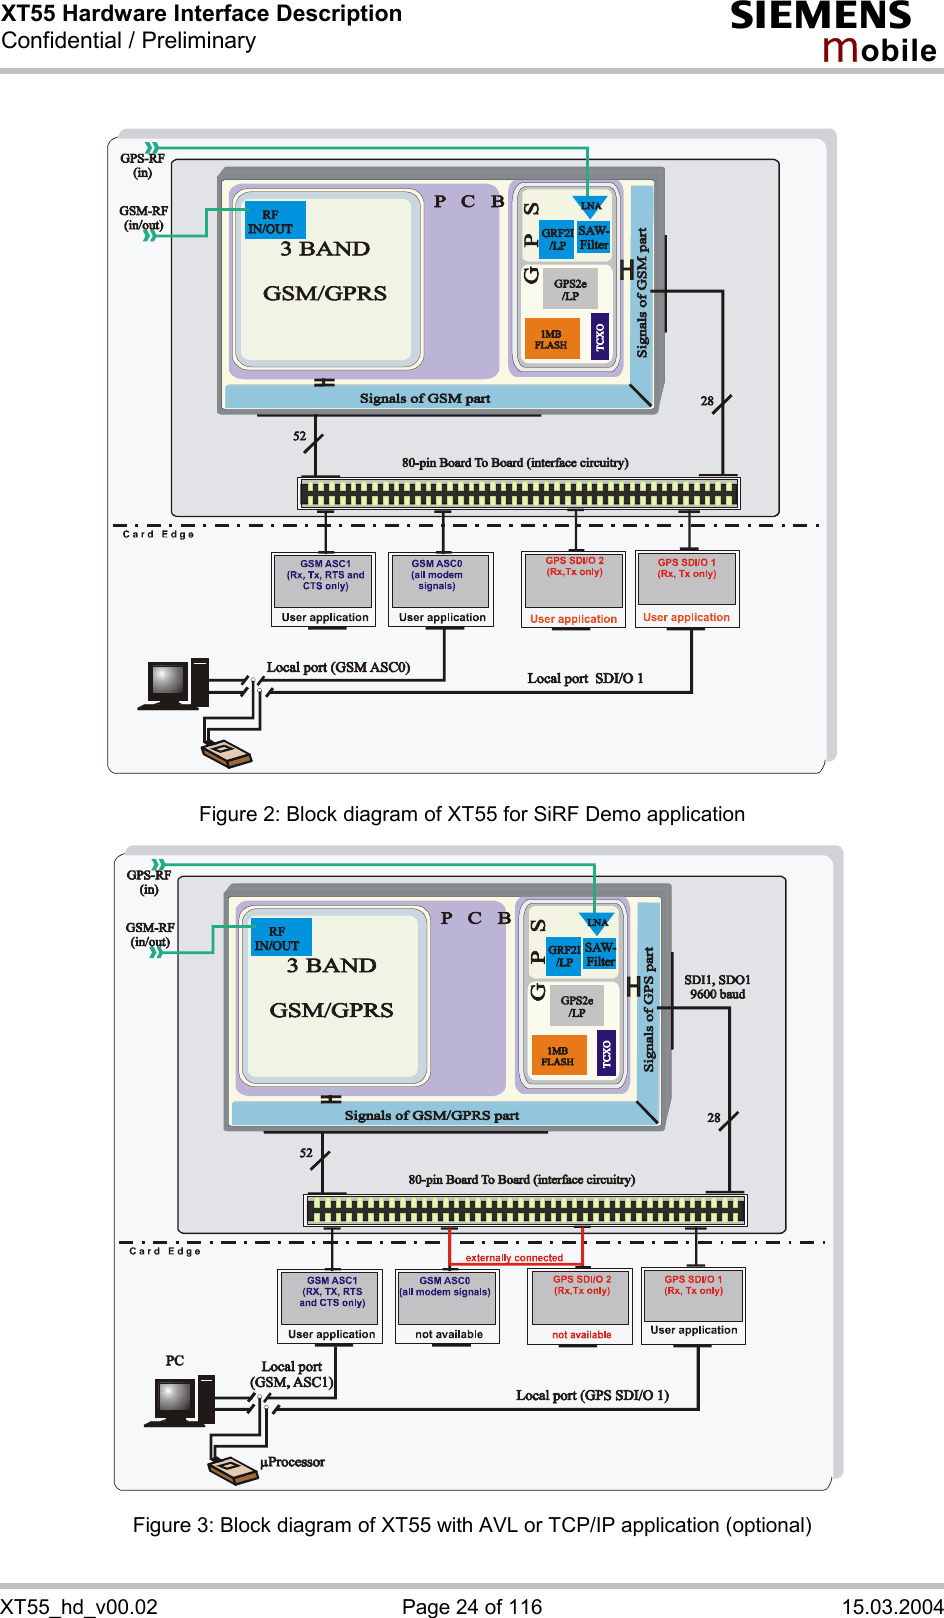 XT55 Hardware Interface Description Confidential / Preliminary s mo b i l e XT55_hd_v00.02  Page 24 of 116  15.03.2004                           Figure 2: Block diagram of XT55 for SiRF Demo application                           Figure 3: Block diagram of XT55 with AVL or TCP/IP application (optional) 